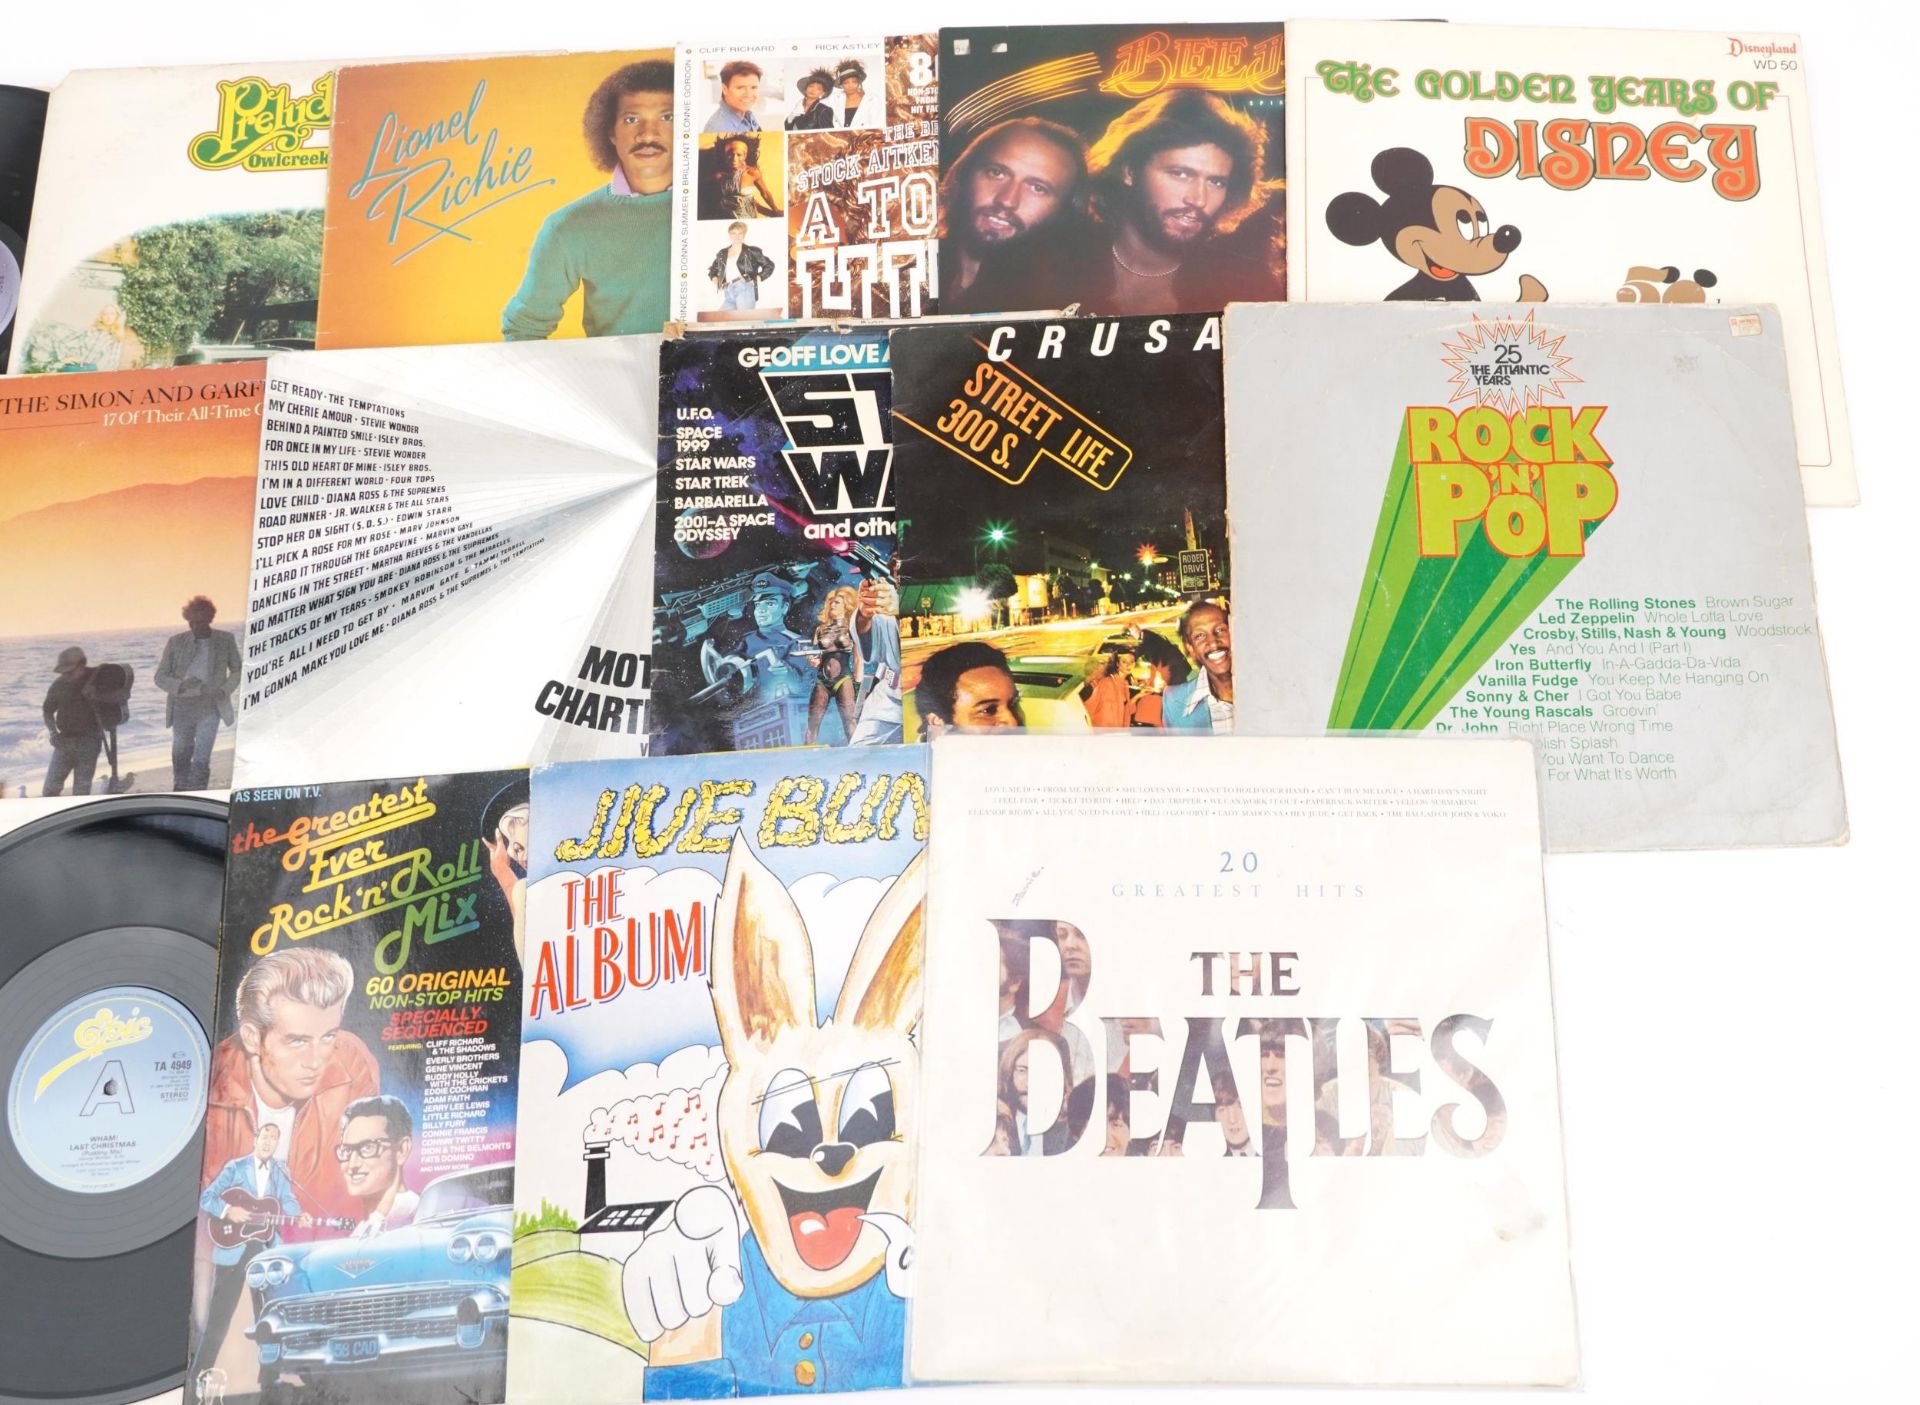 Vinyl LP records including The Beatles, This is Soul and The Bee Gees : For further information on - Image 3 of 3